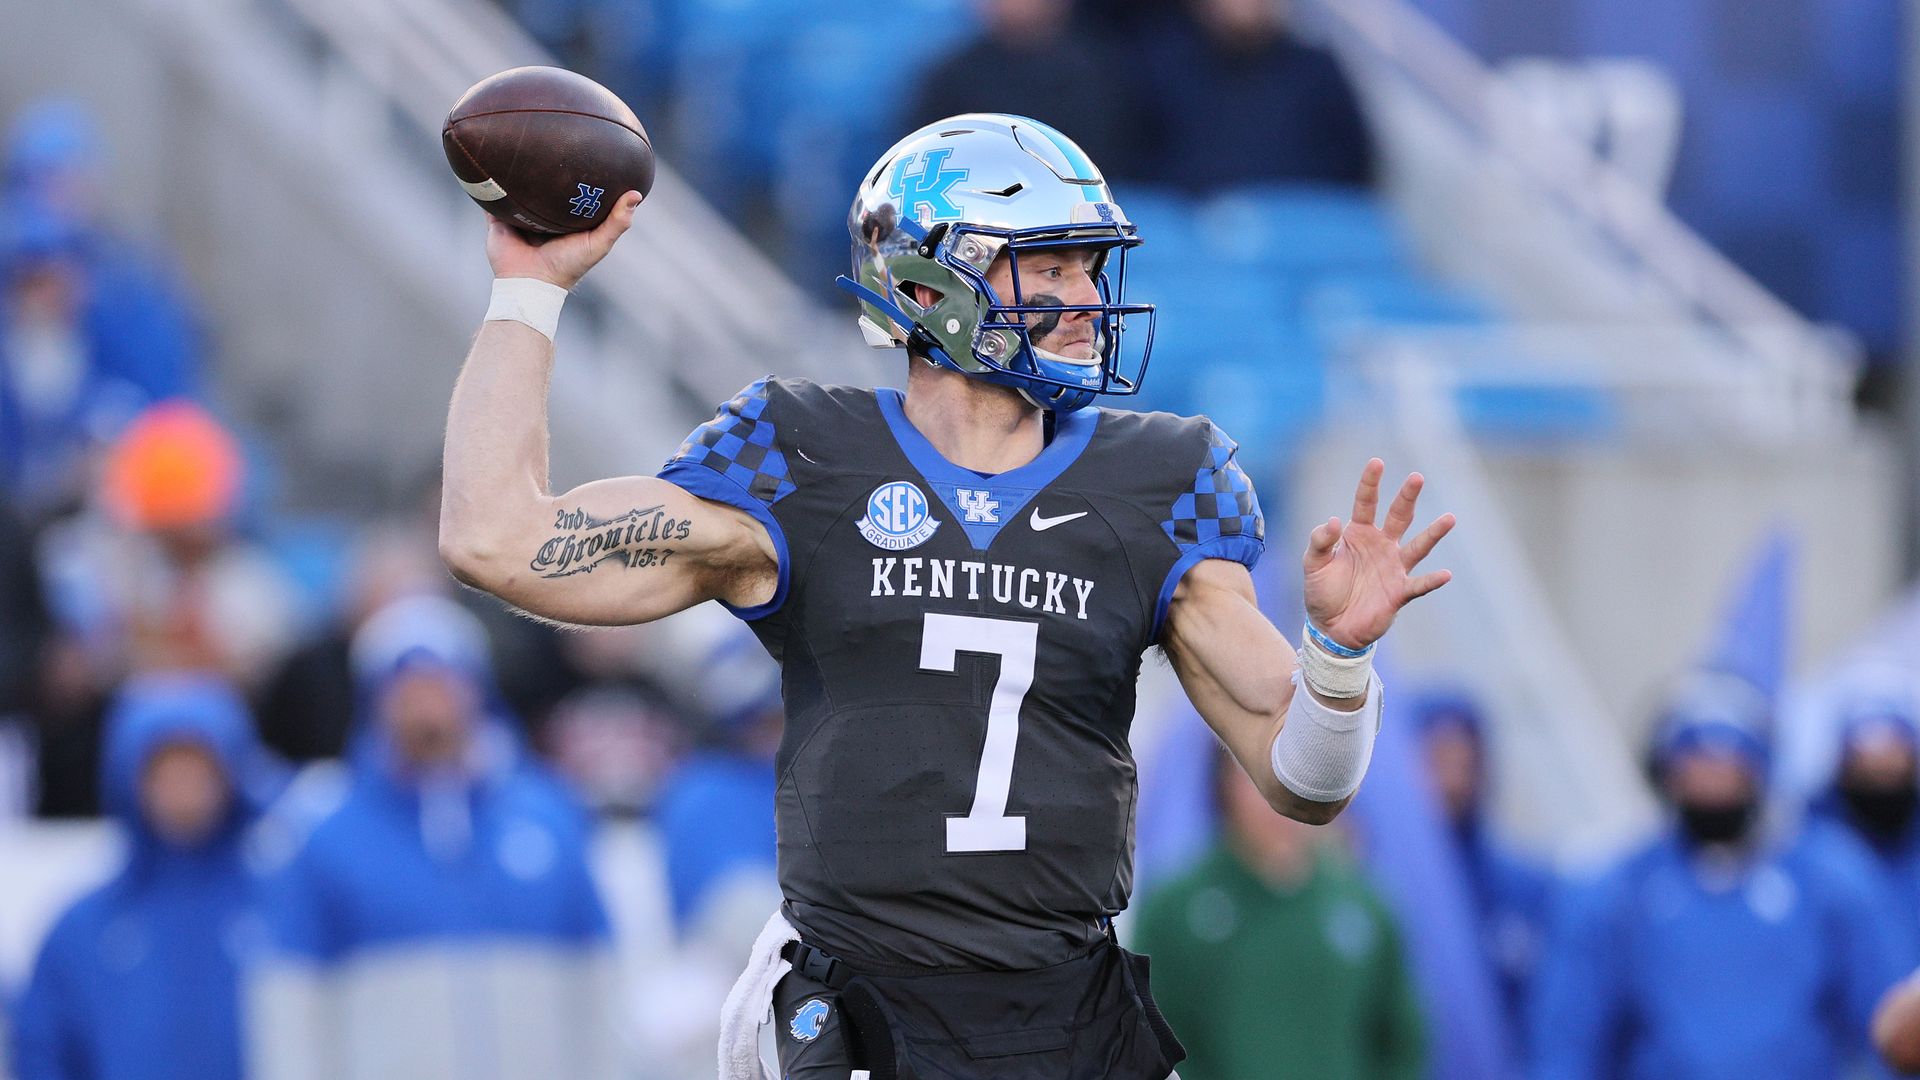 Kentucky quarterback Will Levis throws the ball against Georgia in a game last year.